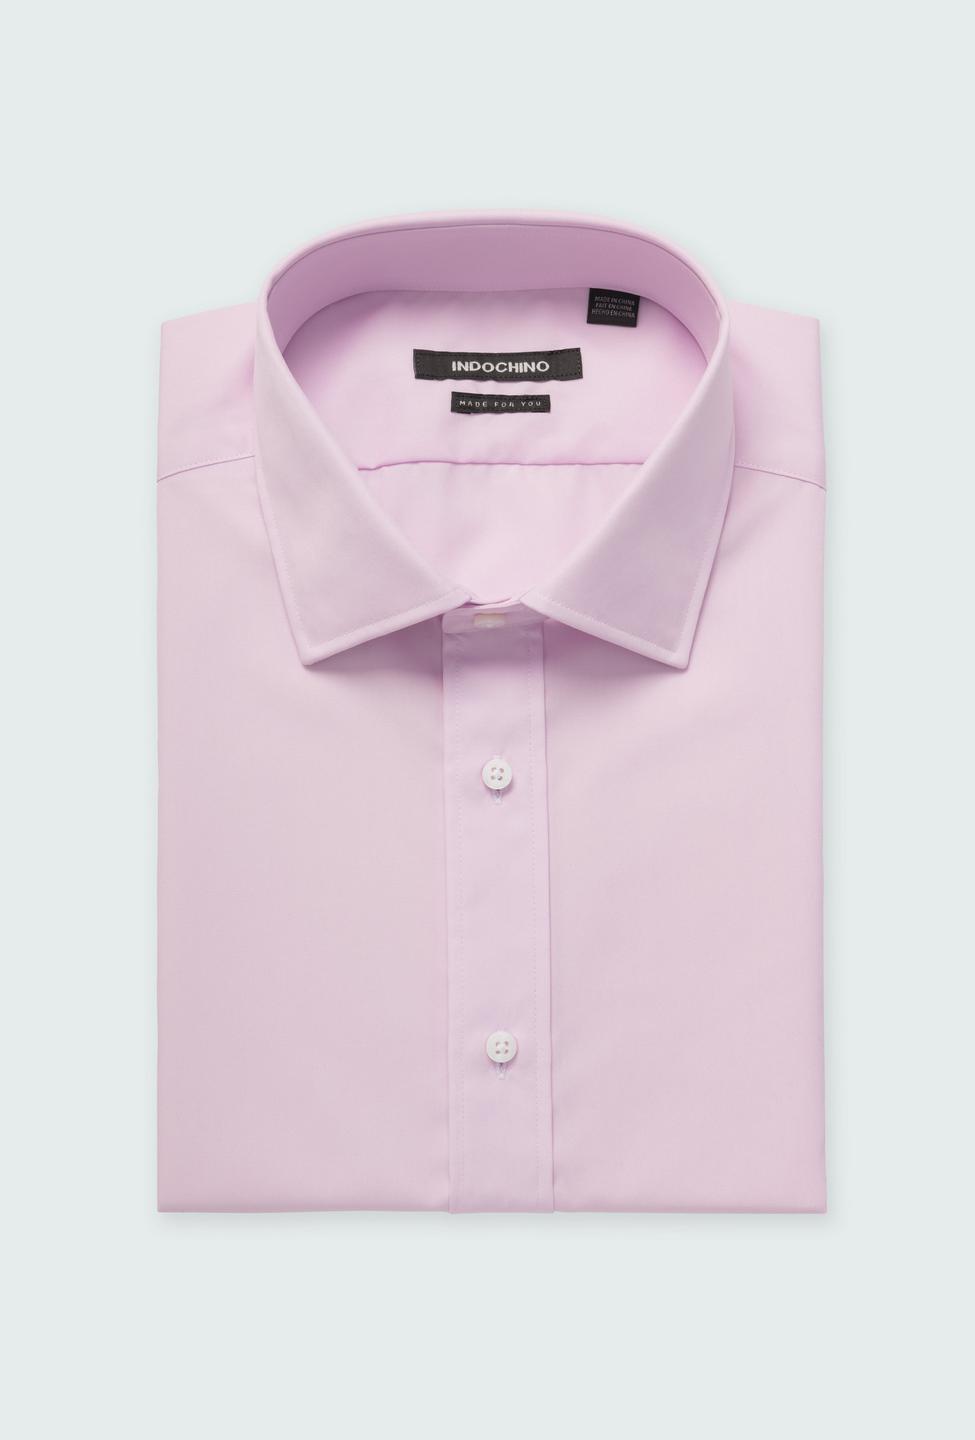 Pink shirt - Helston Solid Design from Premium Indochino Collection